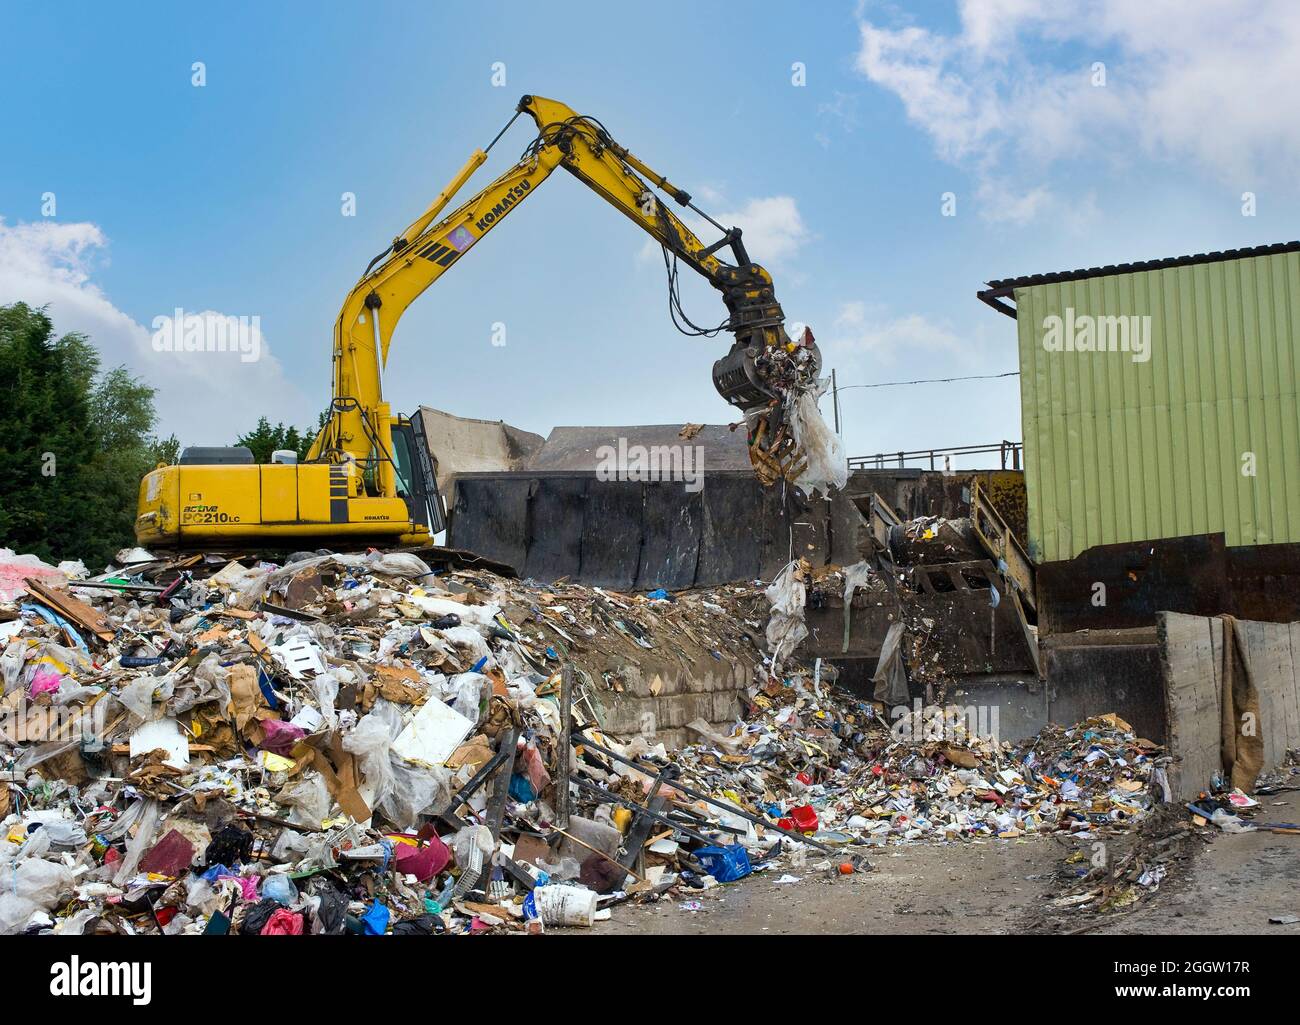 Komatsu crawler excavator working at a materials recycling facility in the UK. Stock Photo